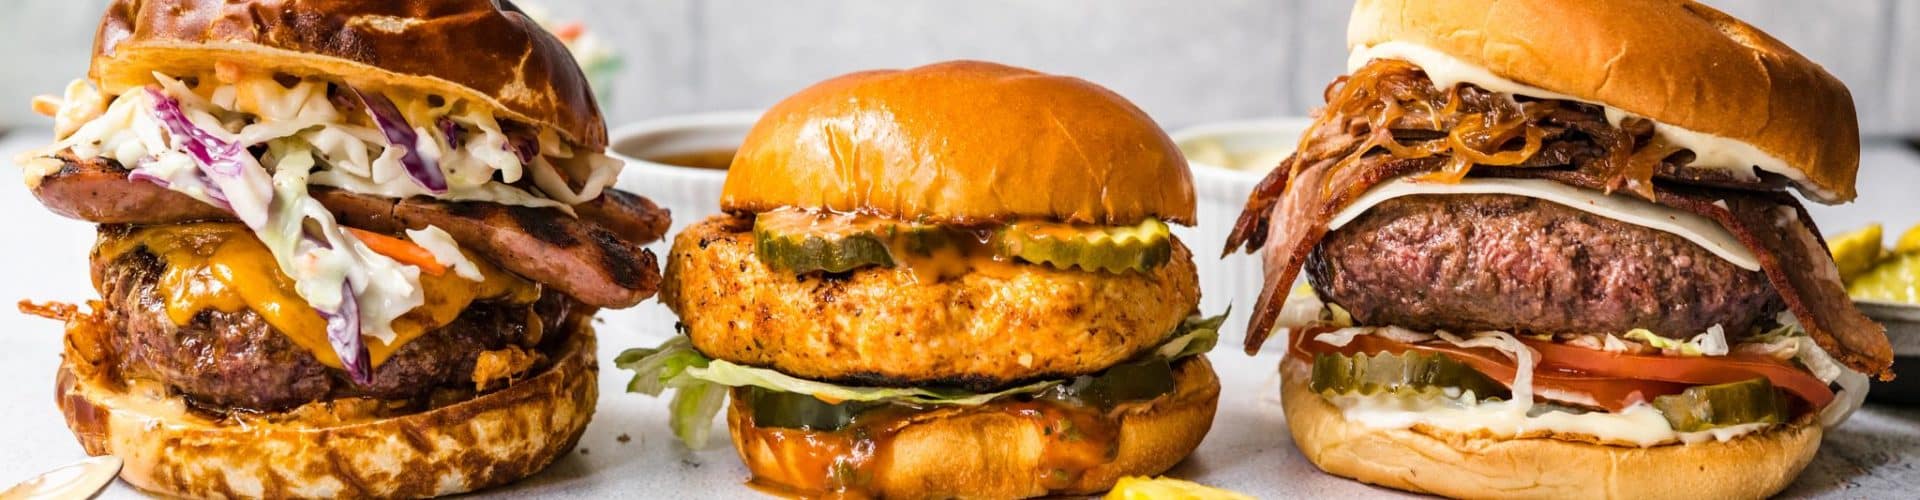 4 Burger Trends to Power your Next Signature Dish - Food Service